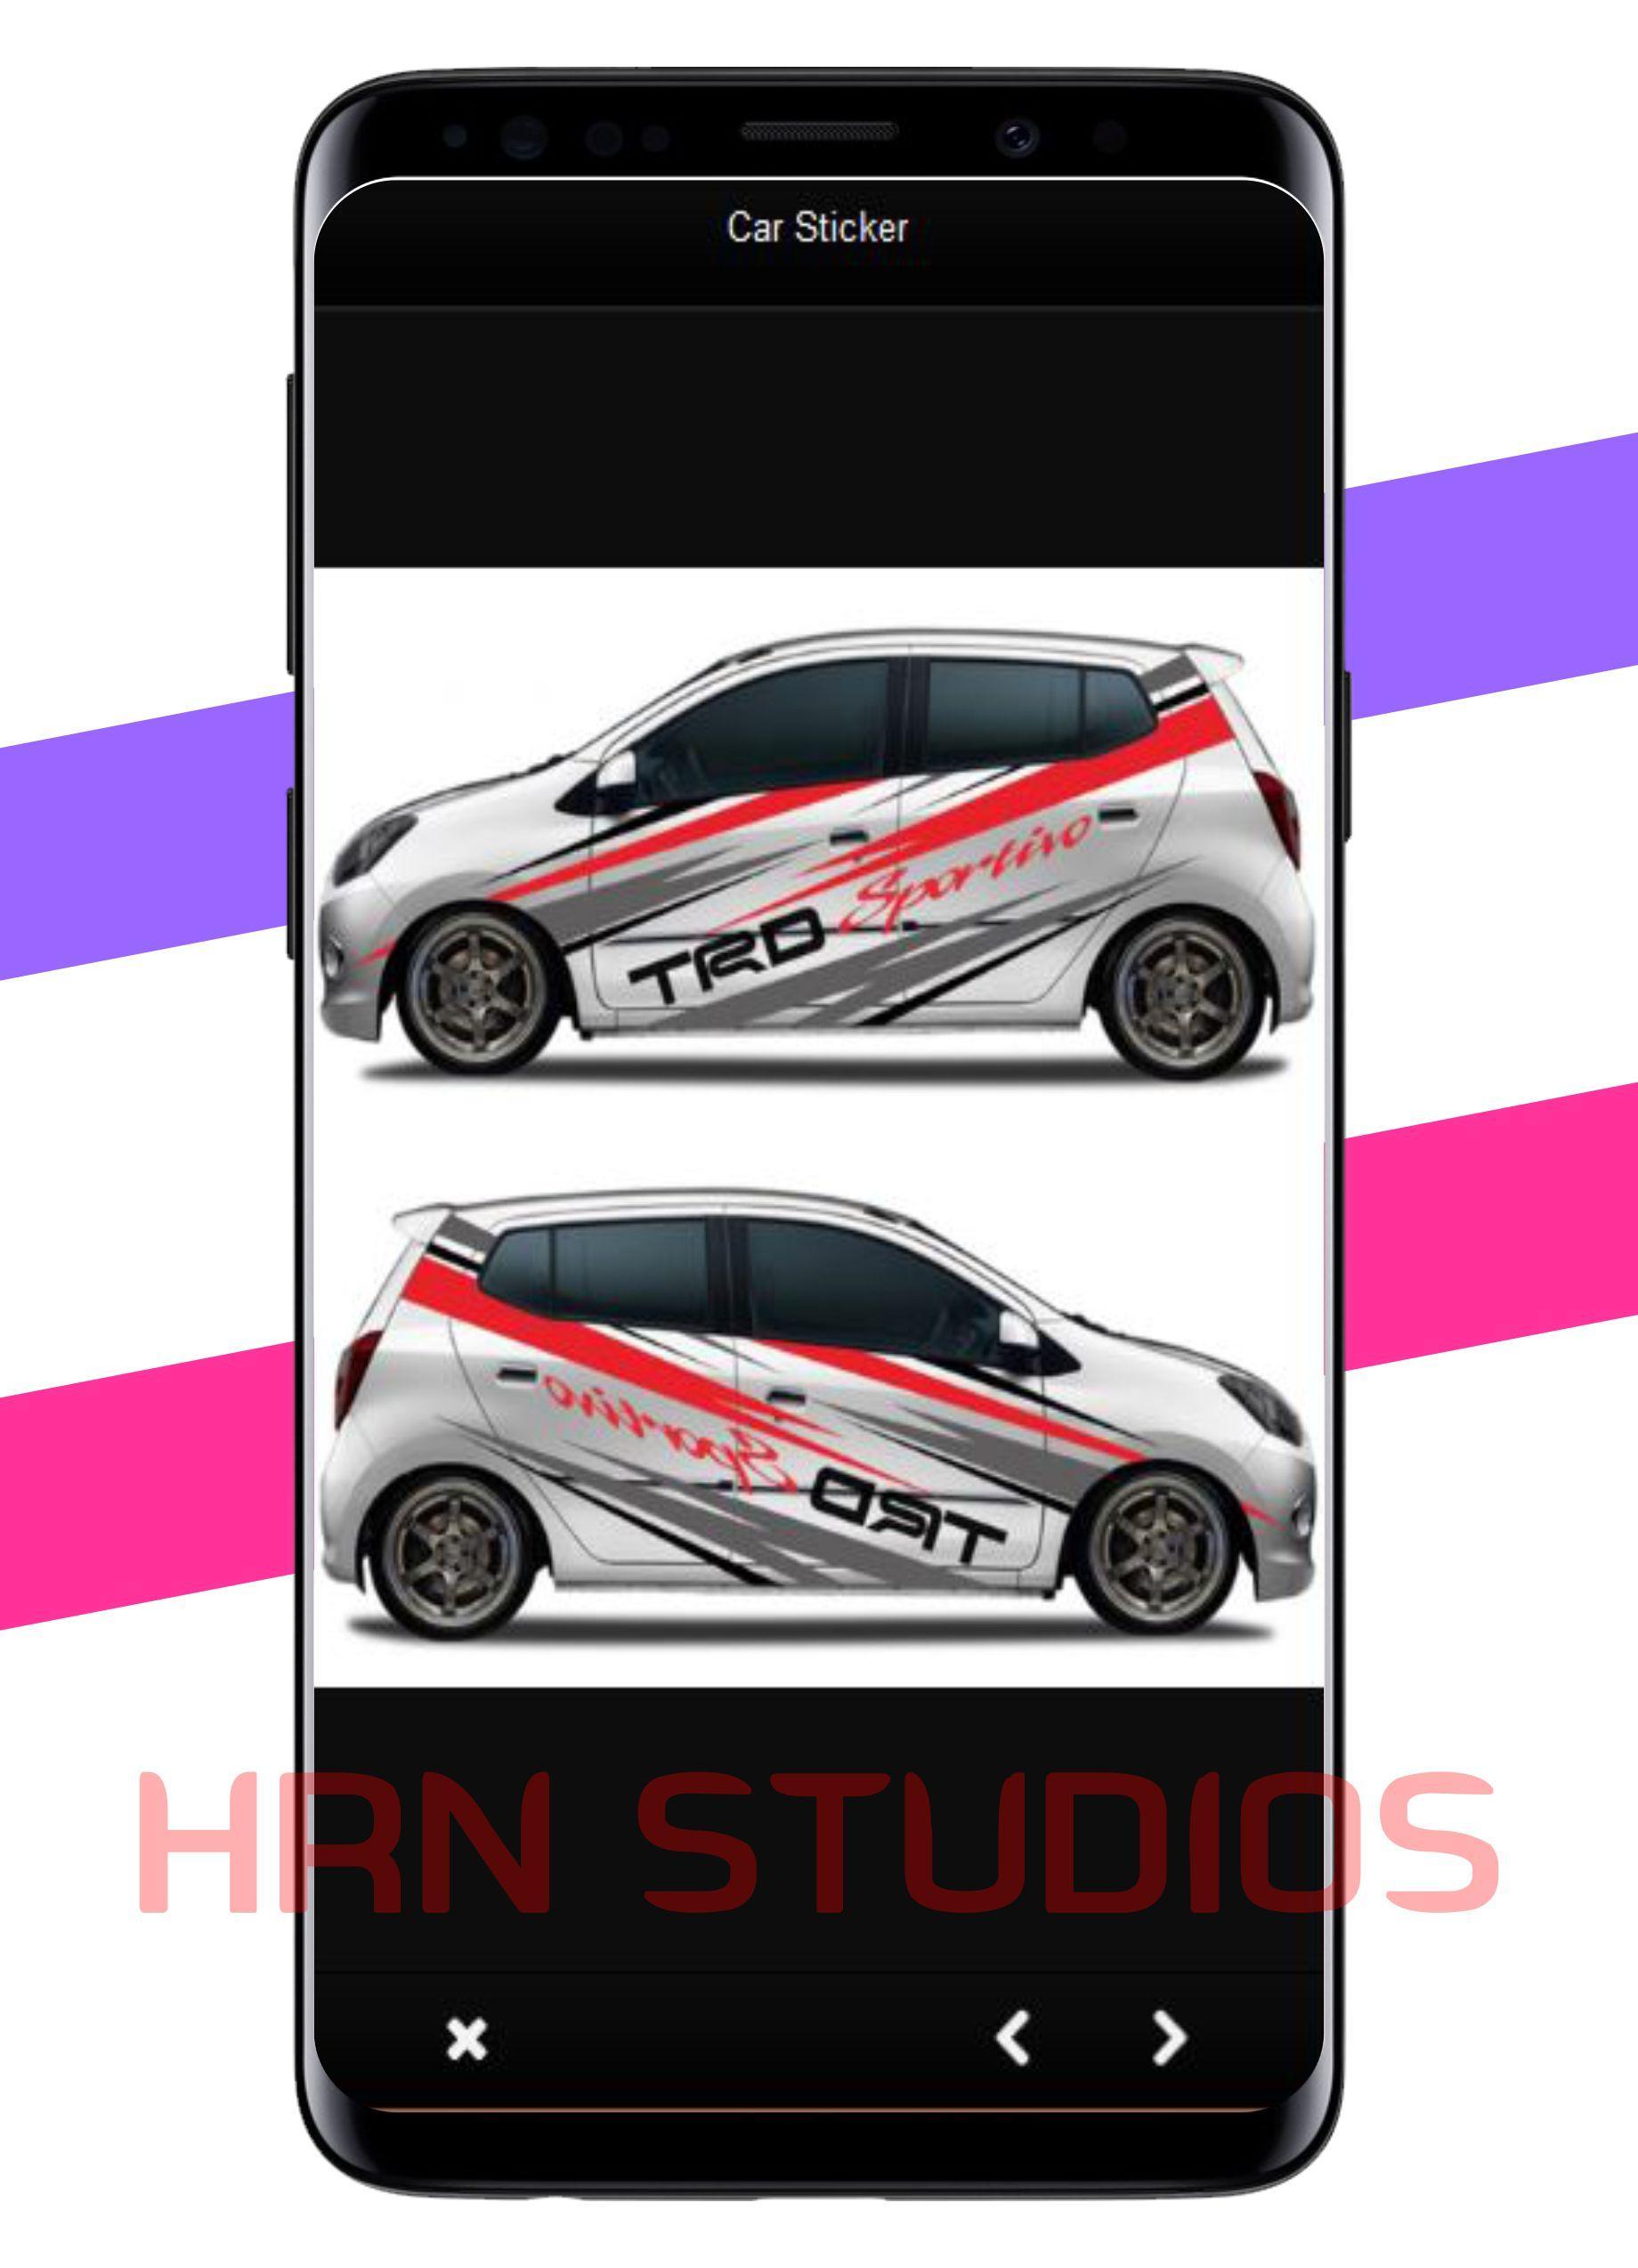 Desain Cutting Stiker Mobil 2019 For Android APK Download